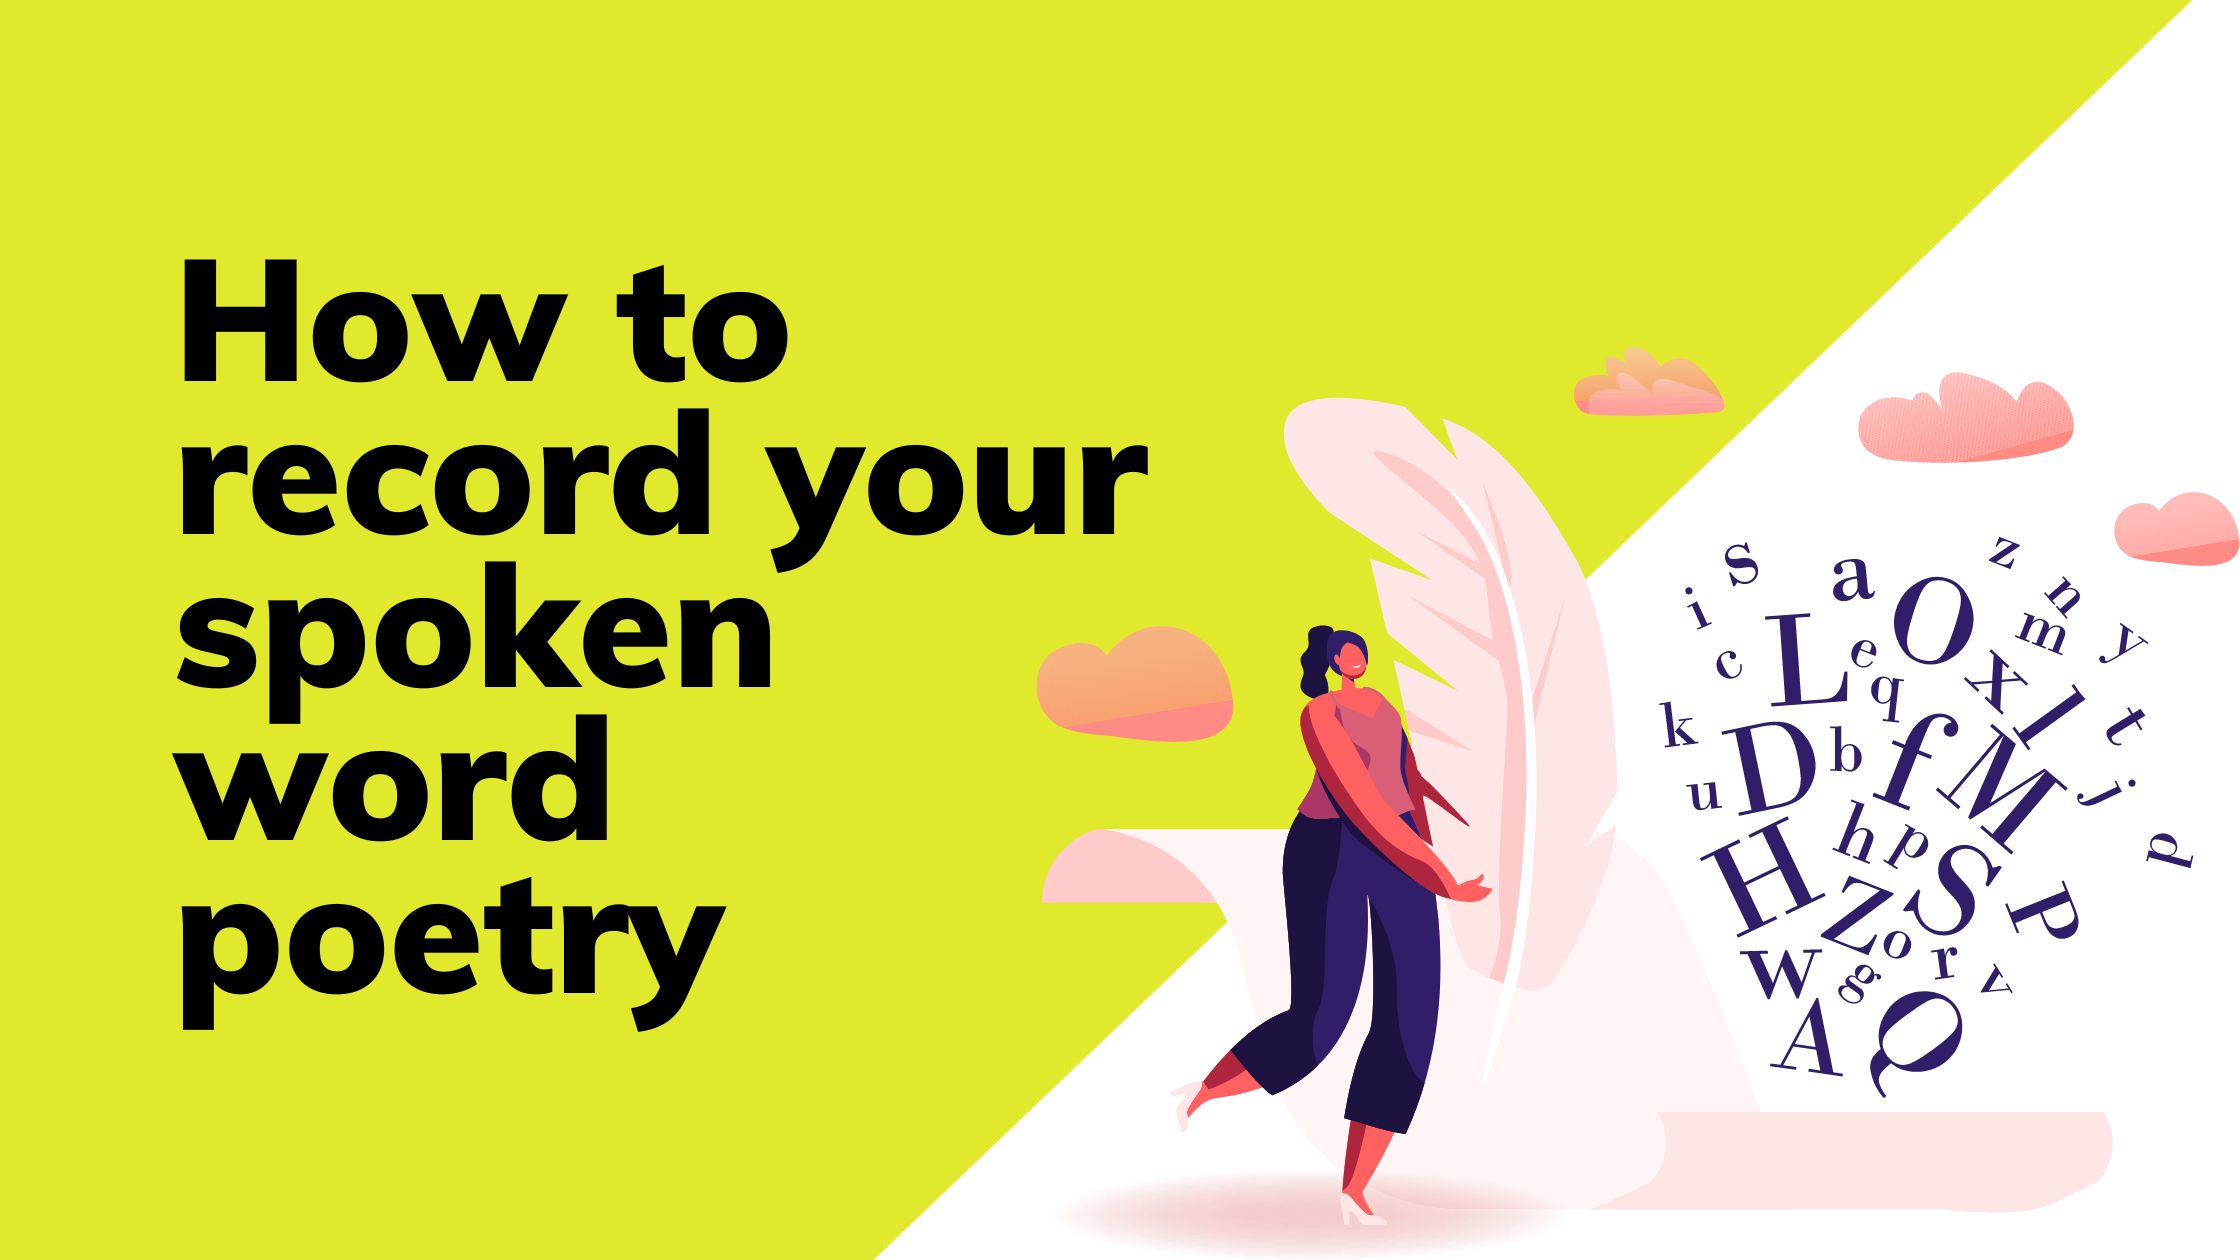 How to record your spoken word poetry